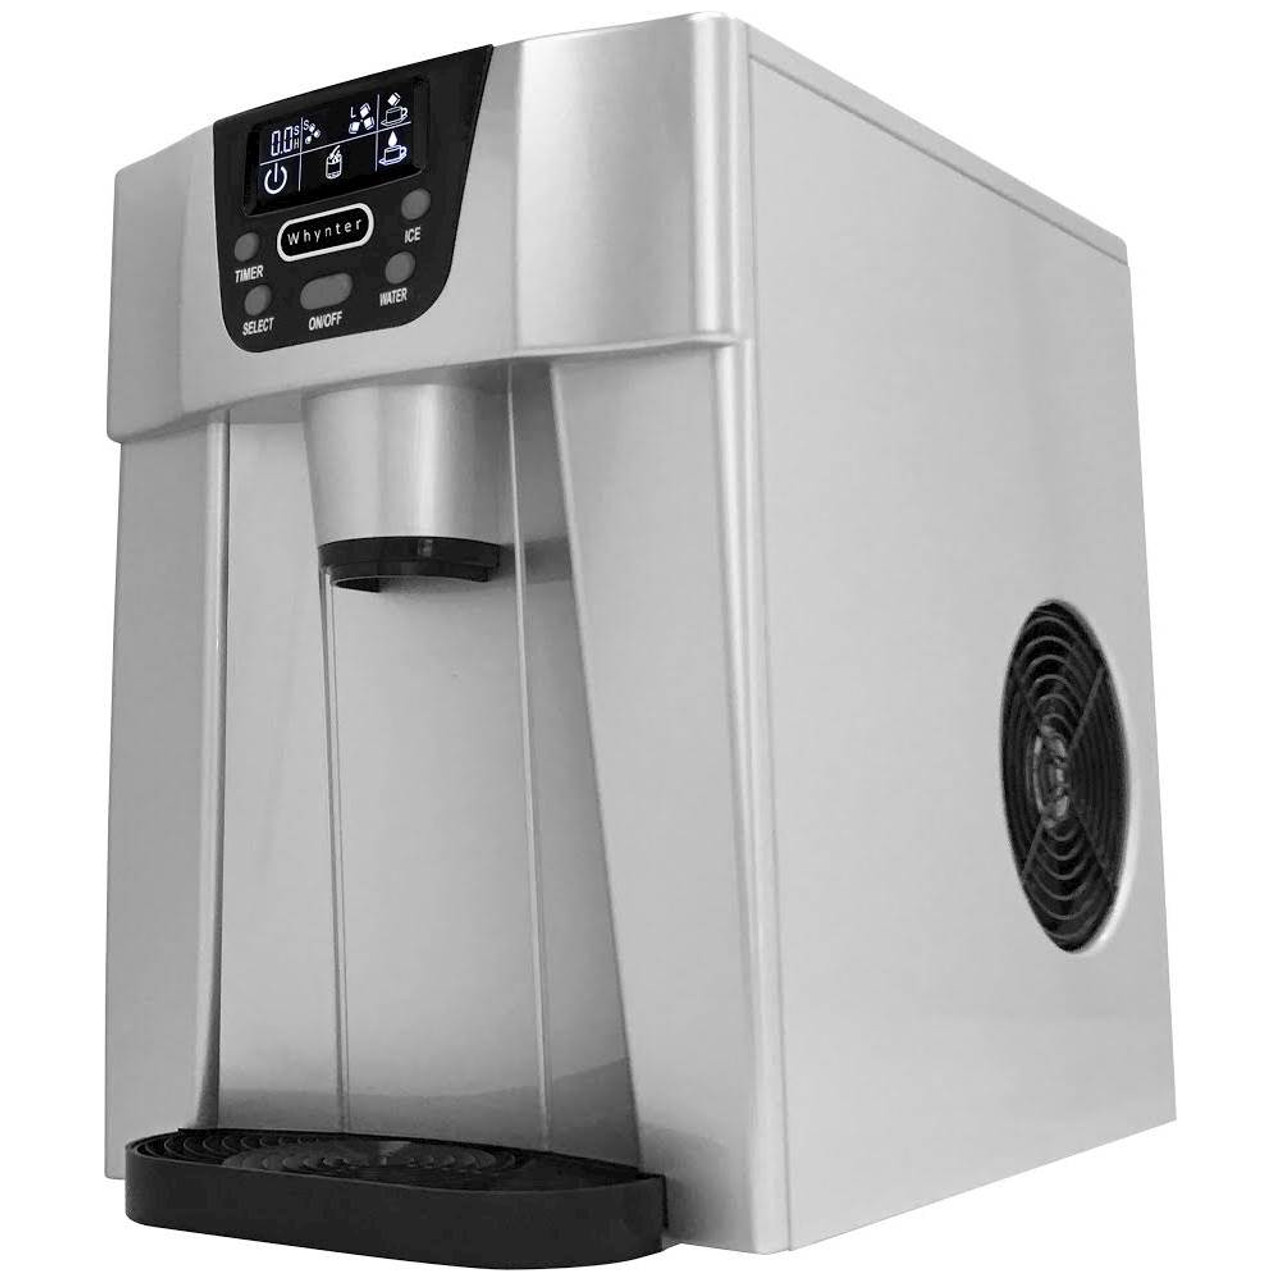 Whynter - 22-Lb. Portable Ice Maker and Water Dispenser - Silver